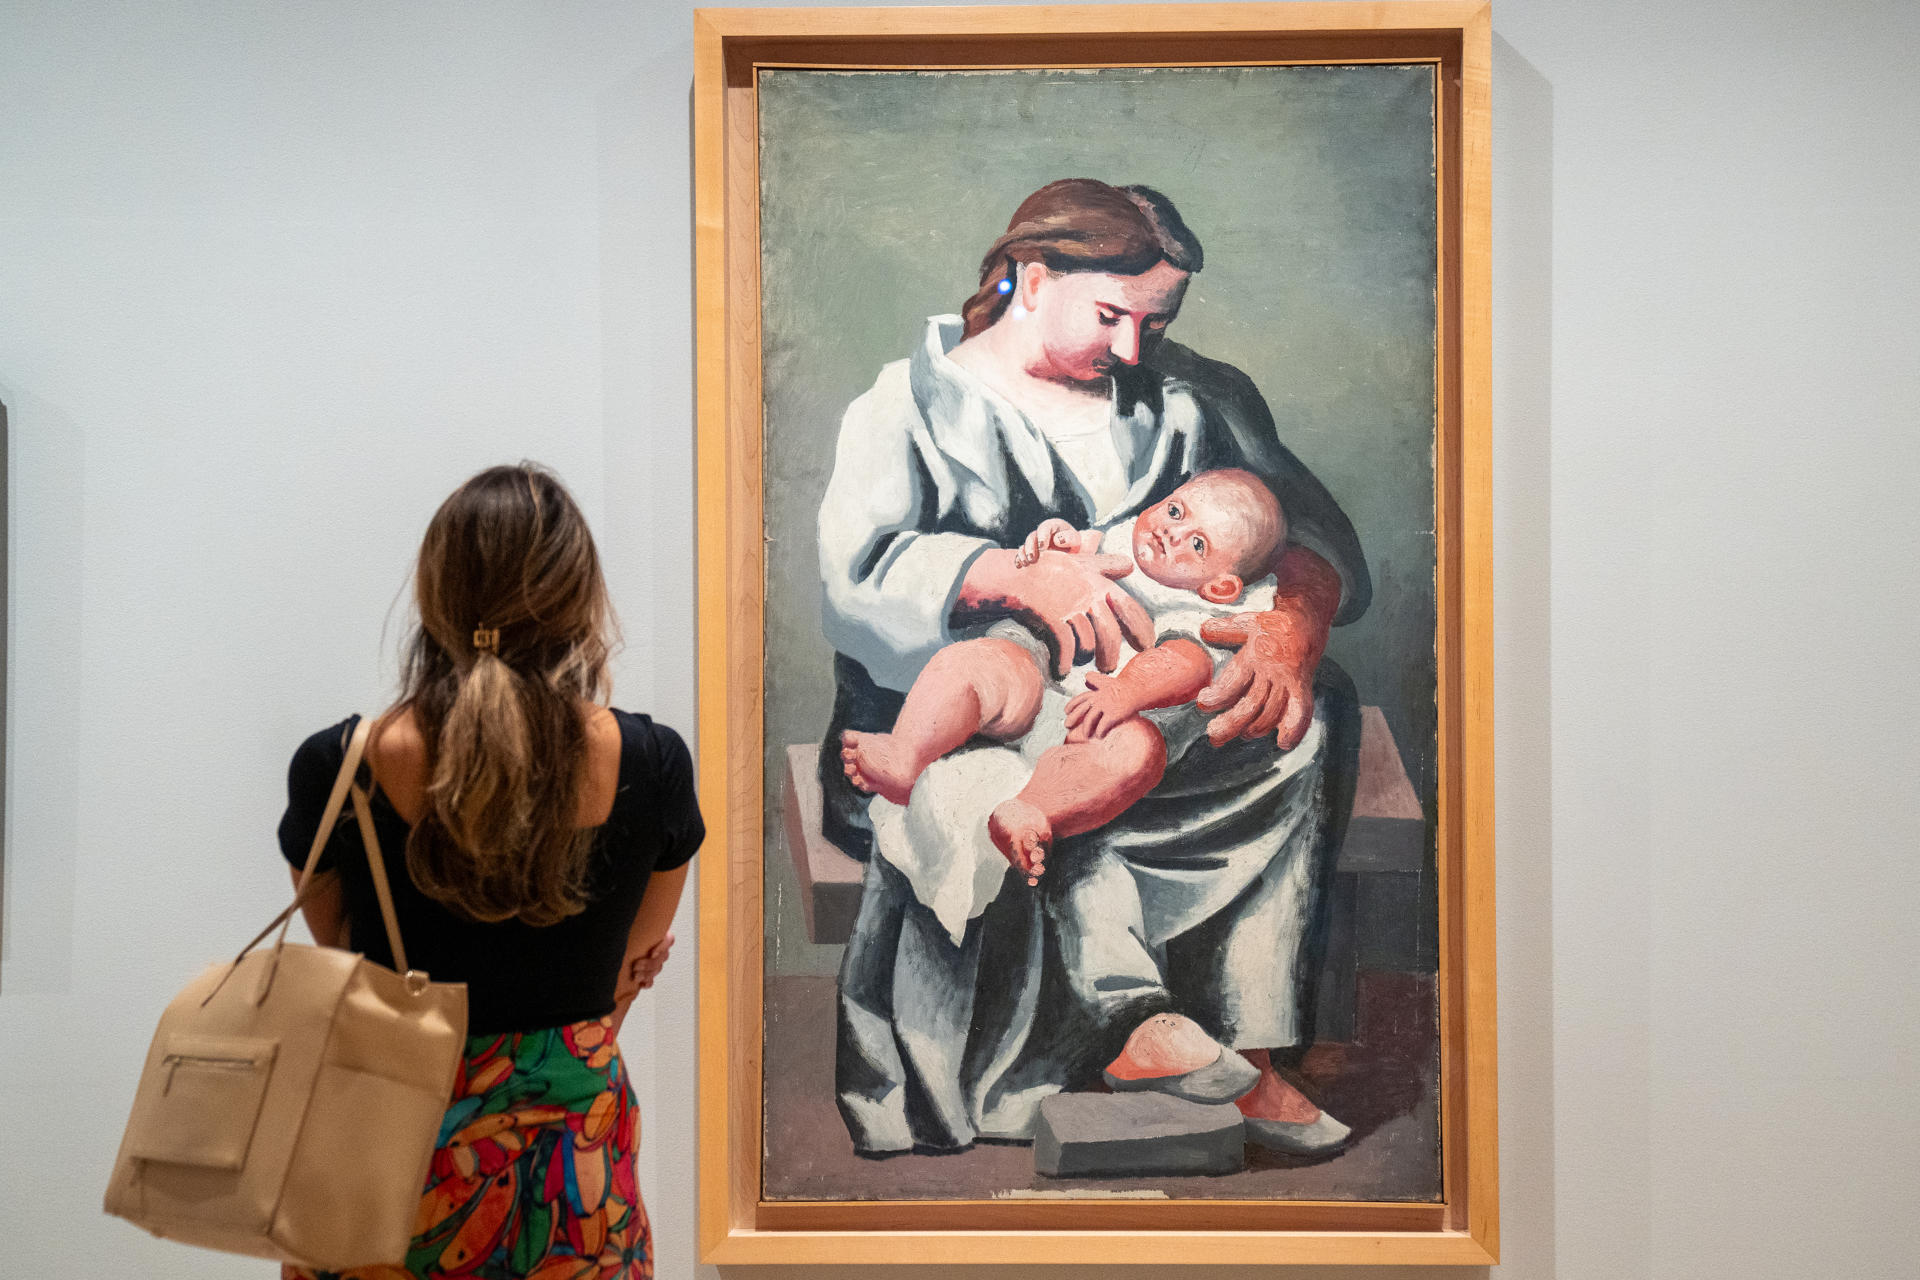 A visitor observes a Picassor painting at the 'Picasso in Fontainebleau' exhibition at the Museum of Modern Art, in New York (United States). EFE/Angel Colmenares
